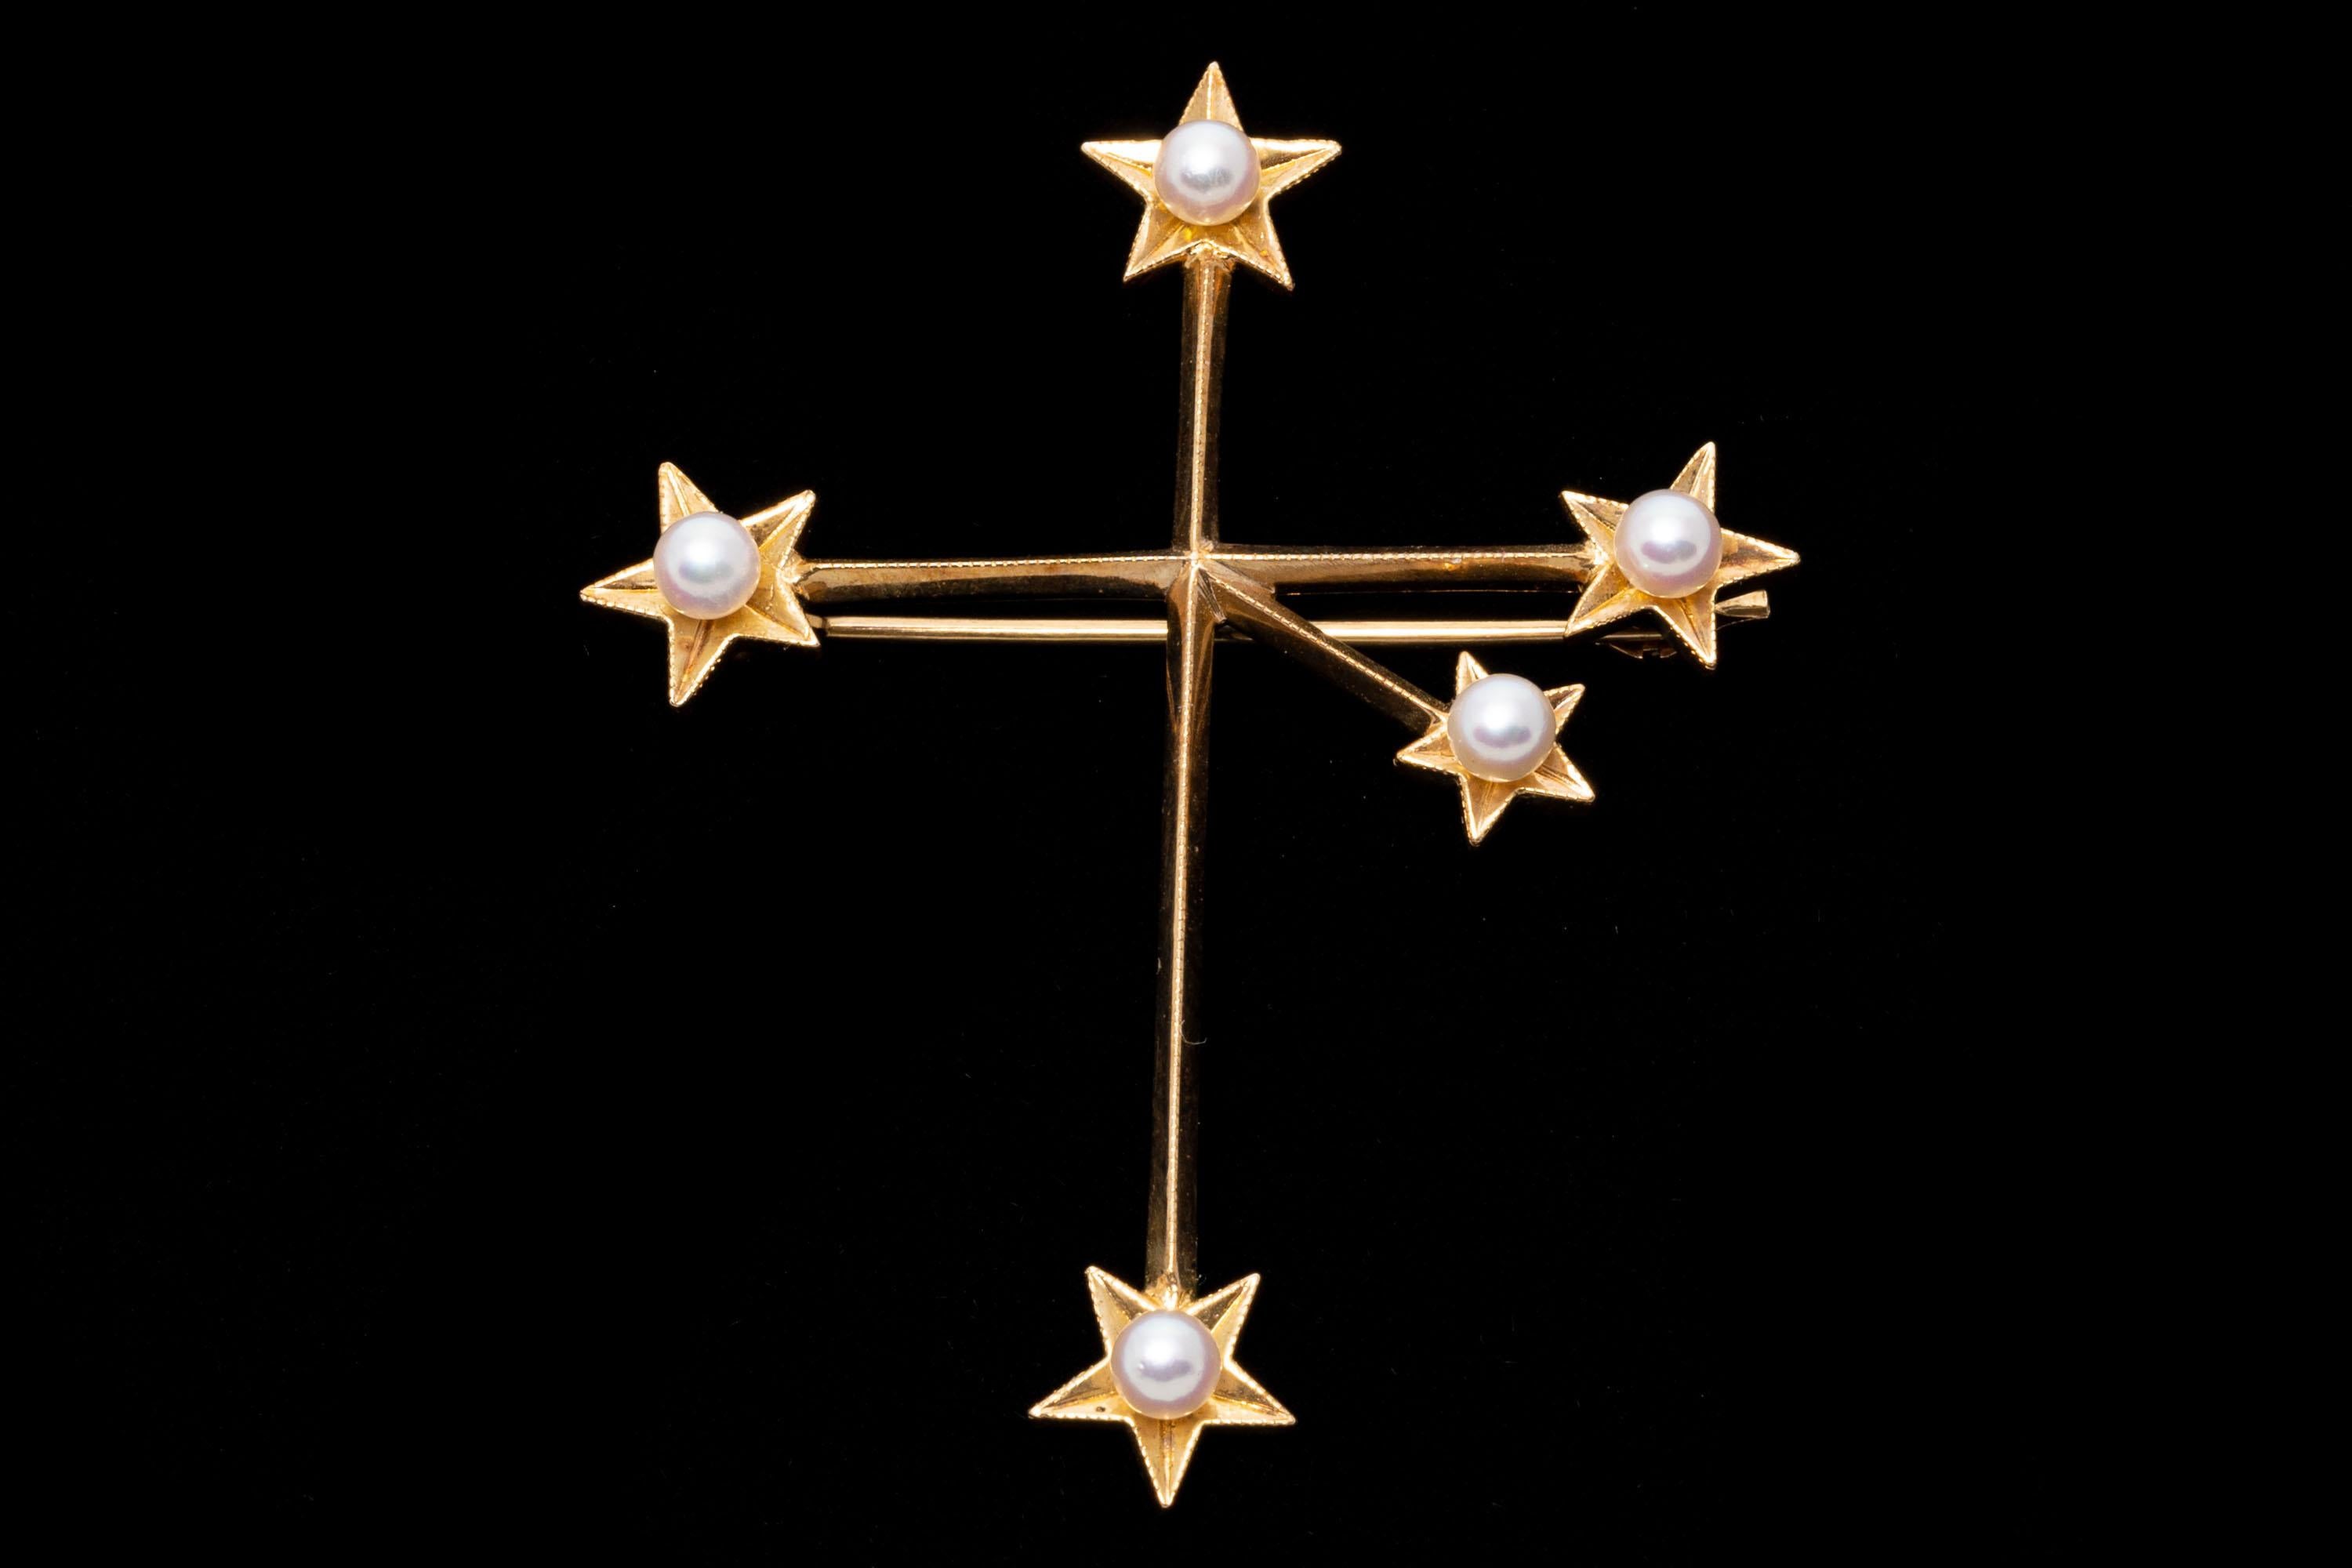 14k yellow gold brooch. This spectacular vintage brooch by Mikimoto is the Southern Cross constellation (the arms are intentionally slightly askew to mimic the stars in the sky). Each arm decorated with a five pointed shaped star end, set with a